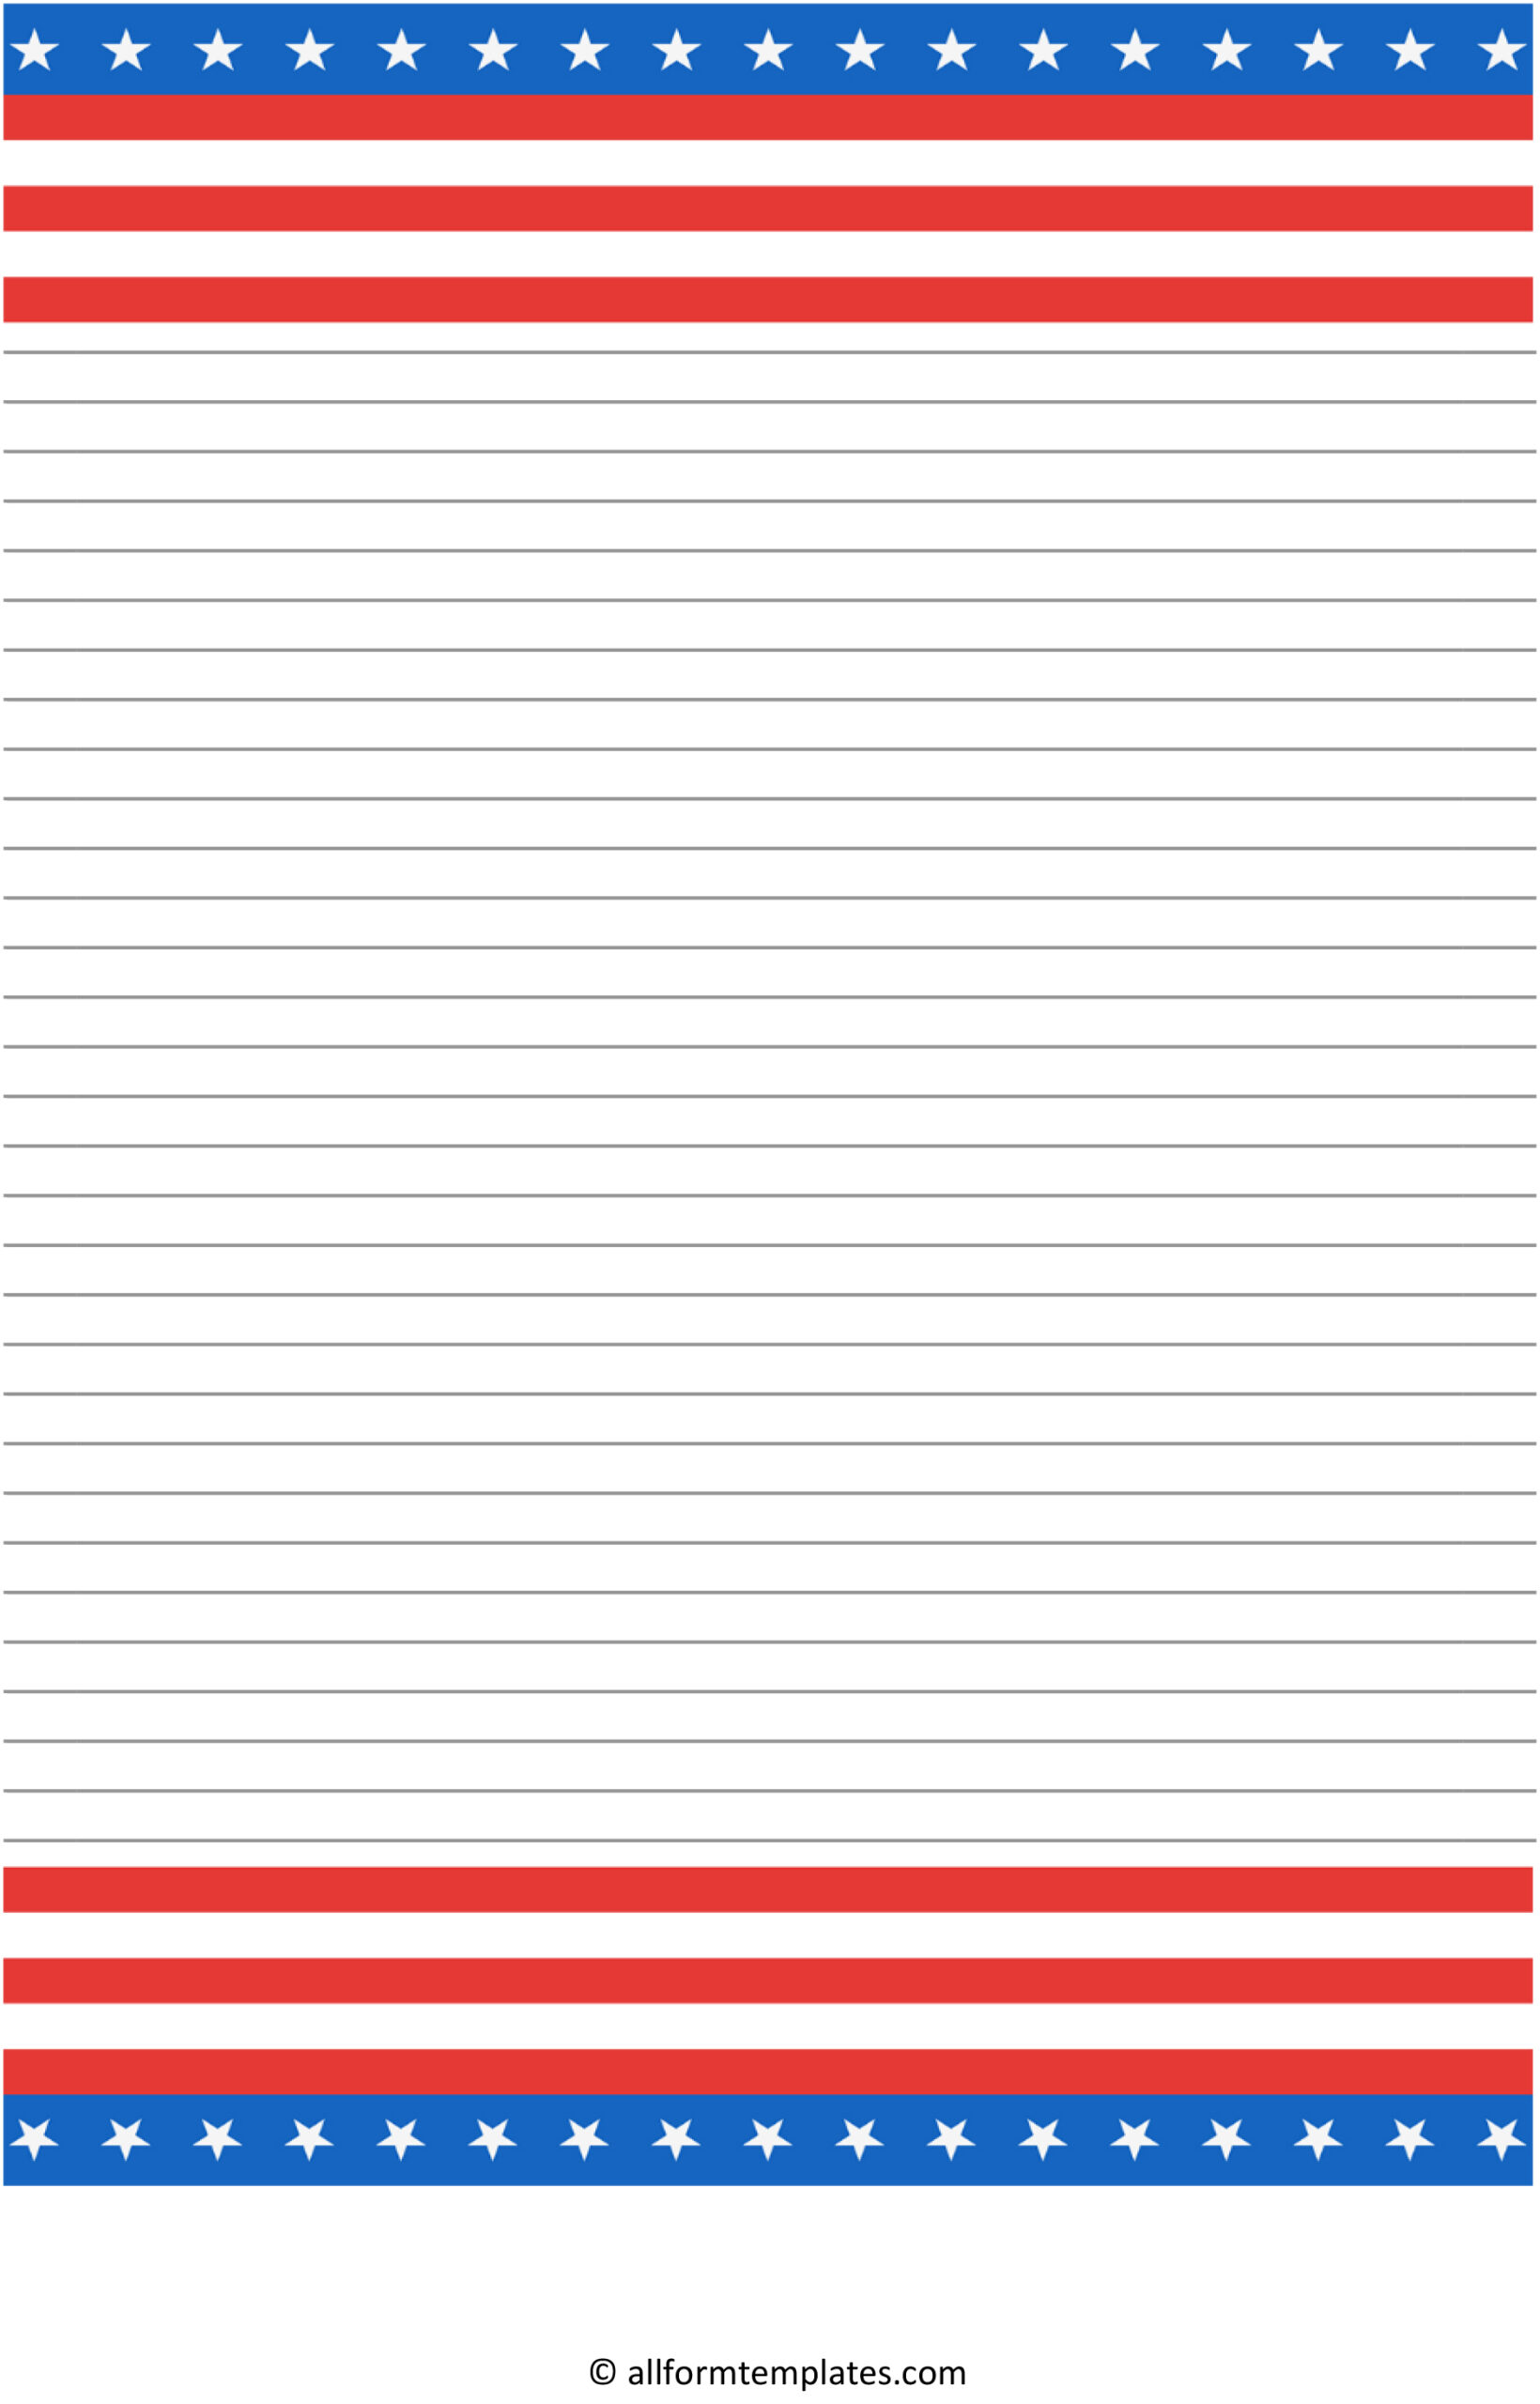 The-American-flag-writing-paper-HD